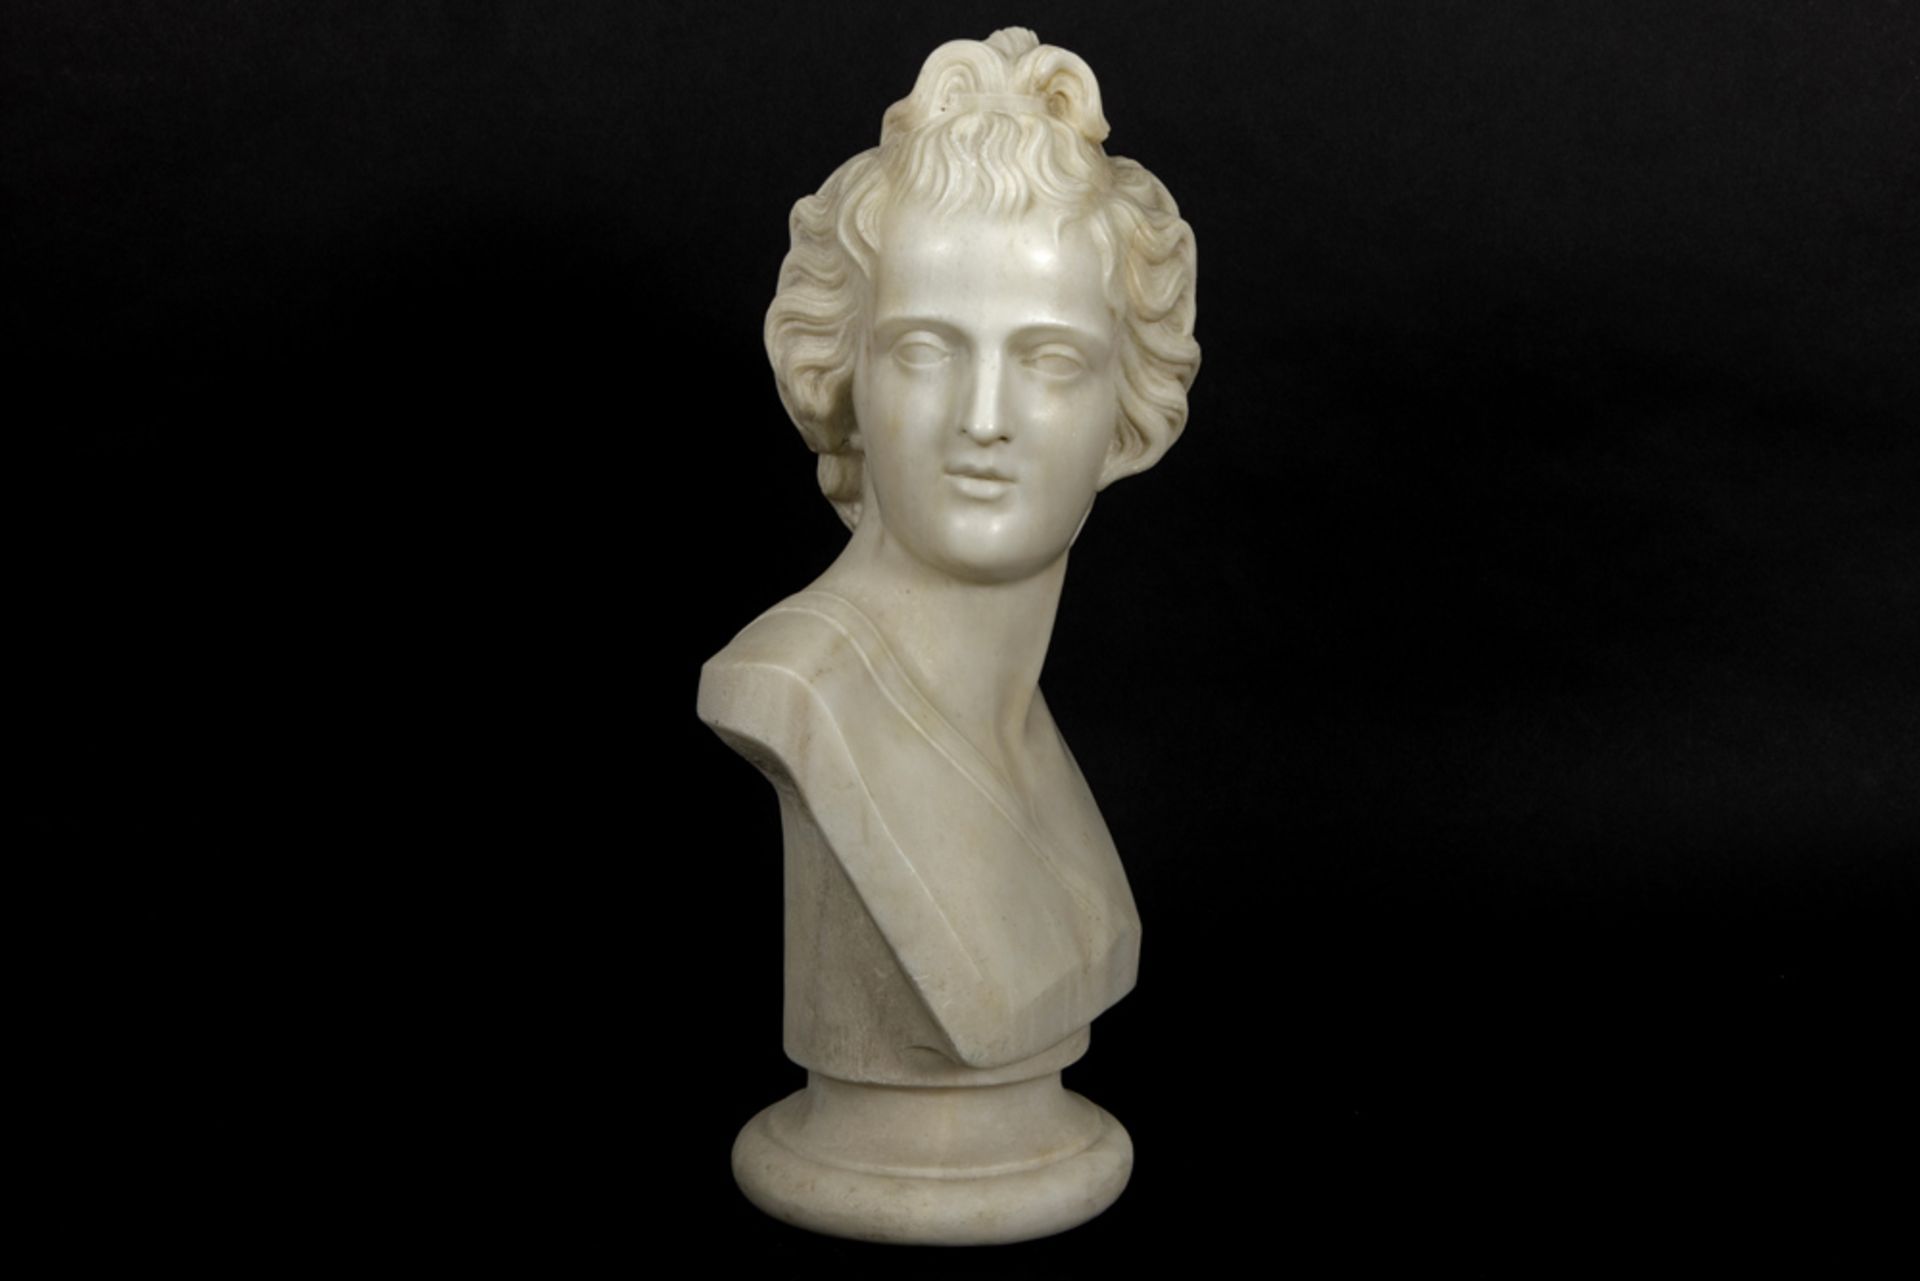 19th Cent. Ioannis Kossos signed "Bust of a Greek Adonis" sculpture in Carrara marble - signed in - Image 6 of 7